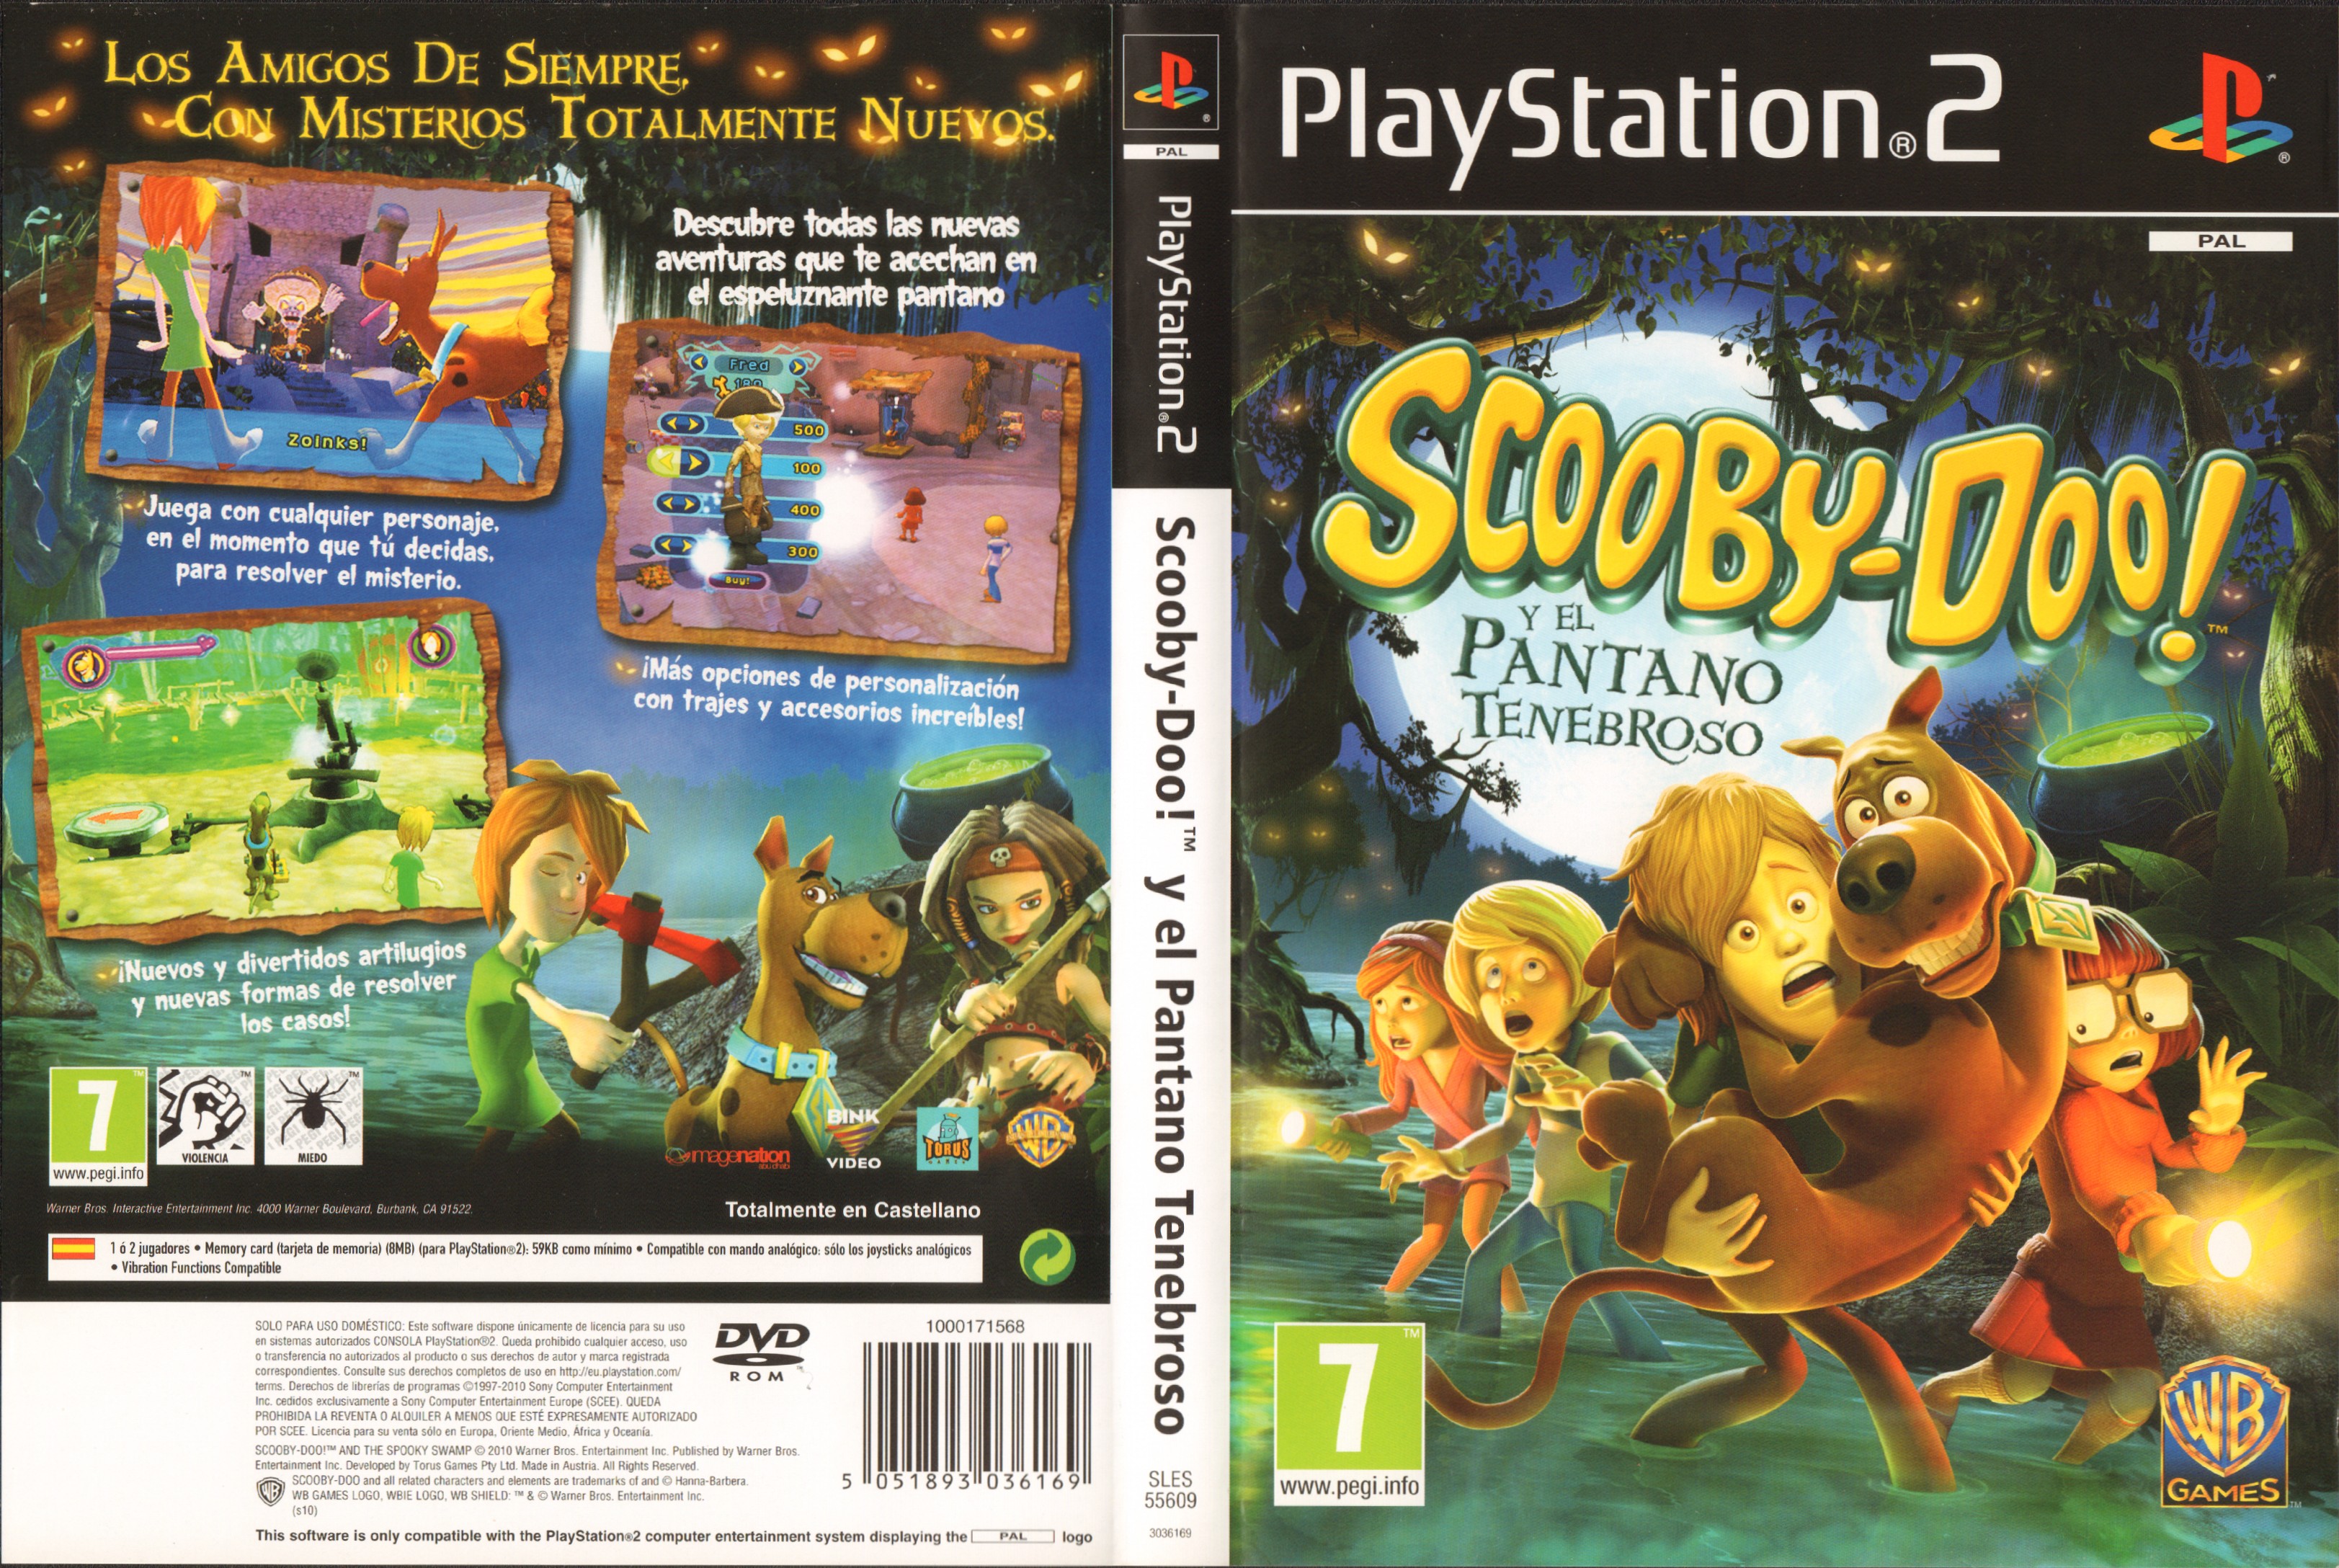 scooby doo spooky swamp for ps2